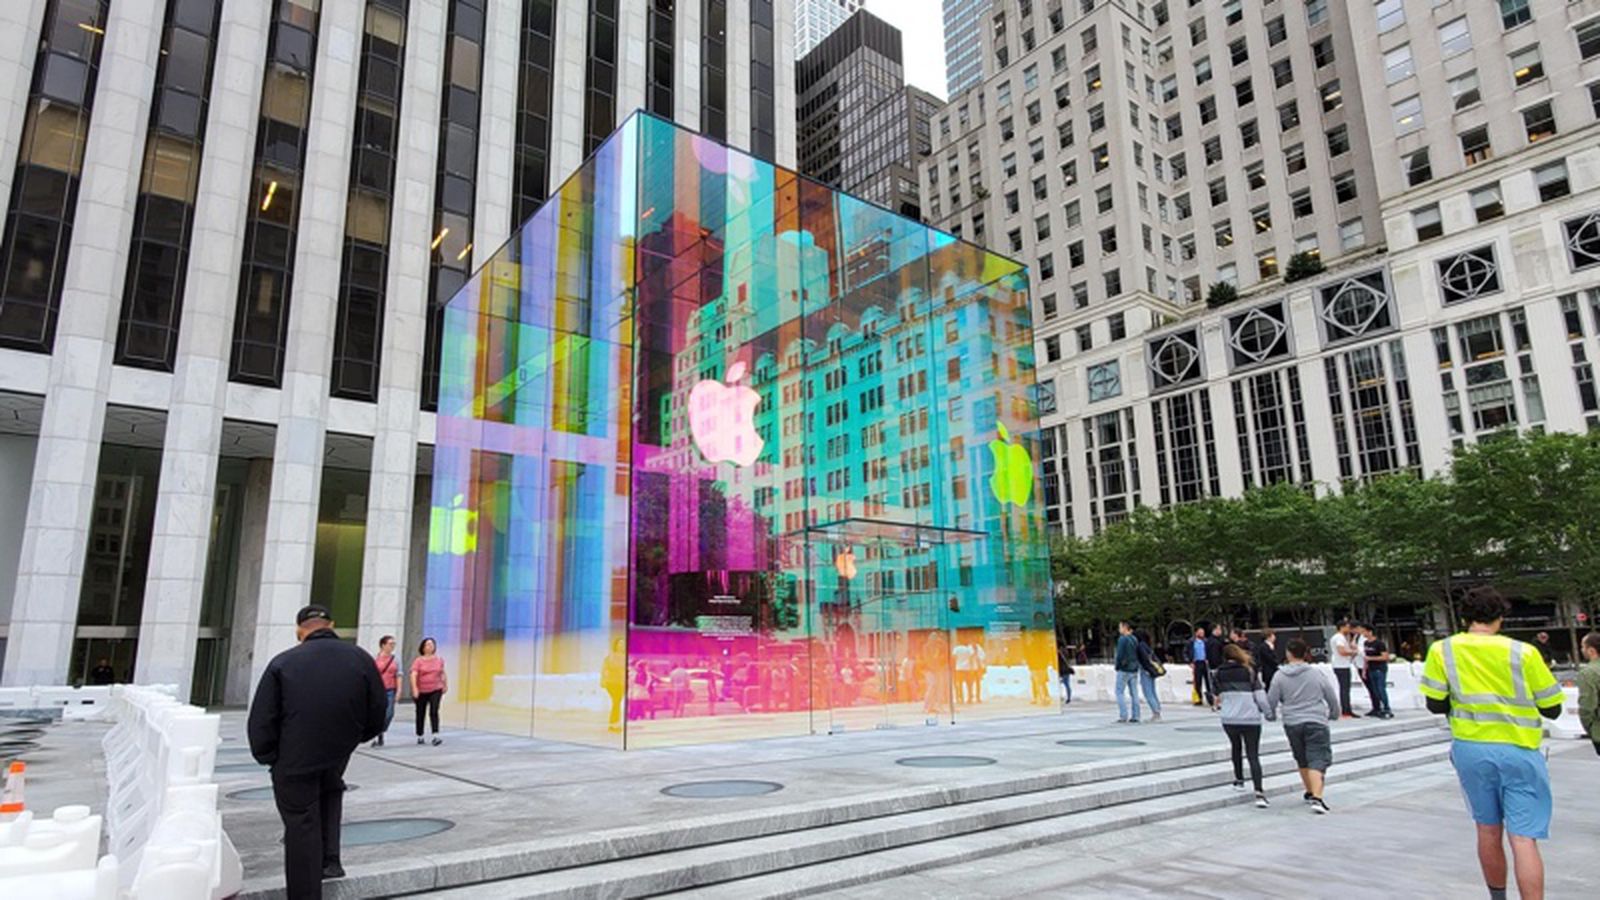 Inside Apple's redesigned 'cube' store in New York City